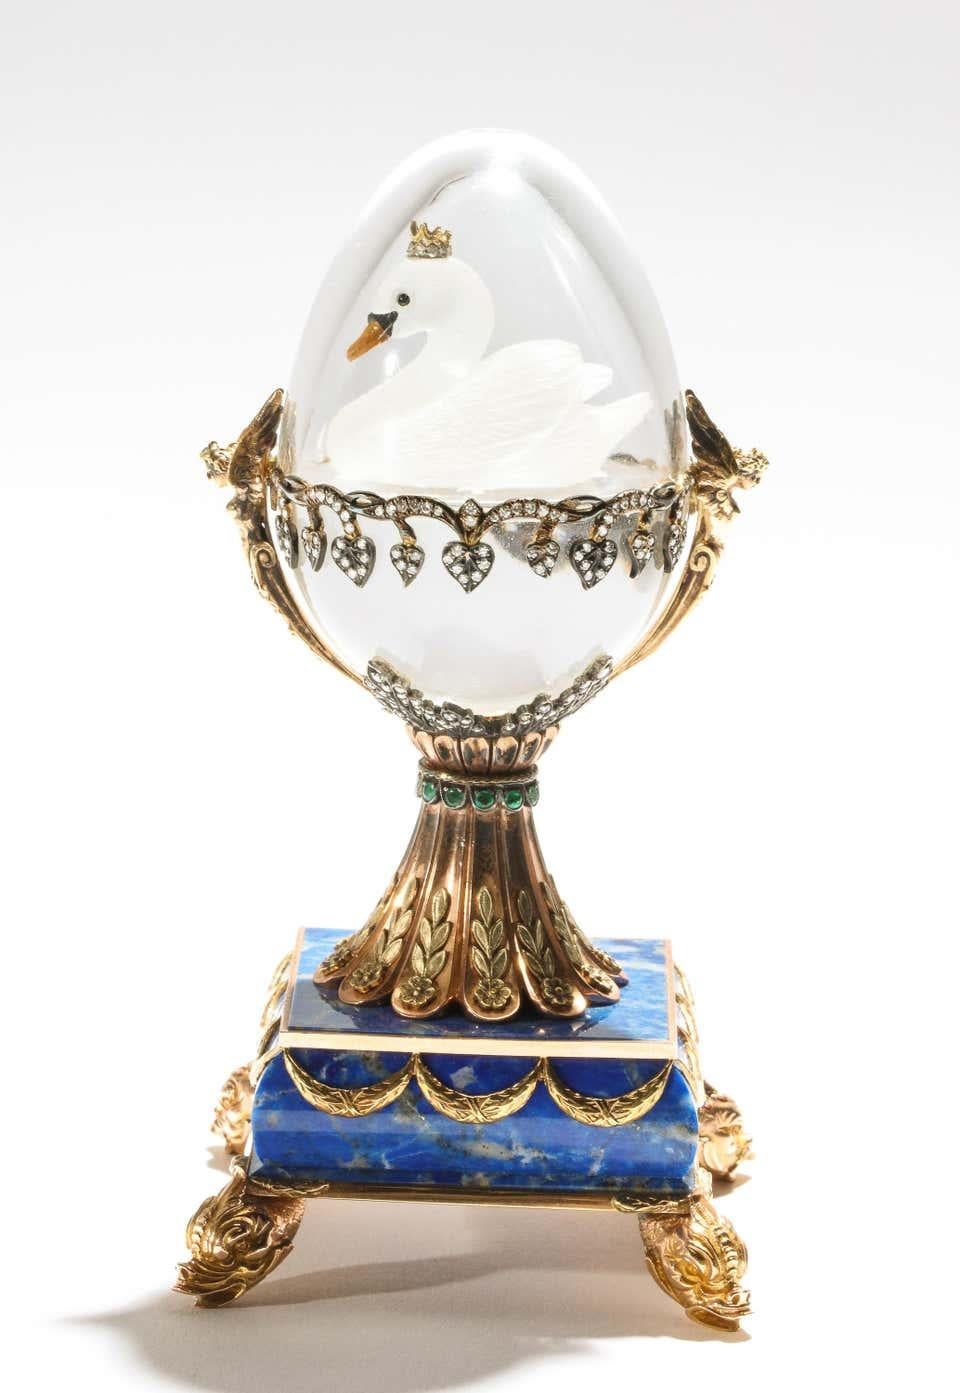 A beautiful Russian 14- karat gold, diamonds, emeralds, lapis lazuli and glass egg with swan, by S. Rudle, 20th century.  

Two color, 14-karat gold mounts, the egg in the Faberge style with a floating frosted glass swan, mounted with diamonds,